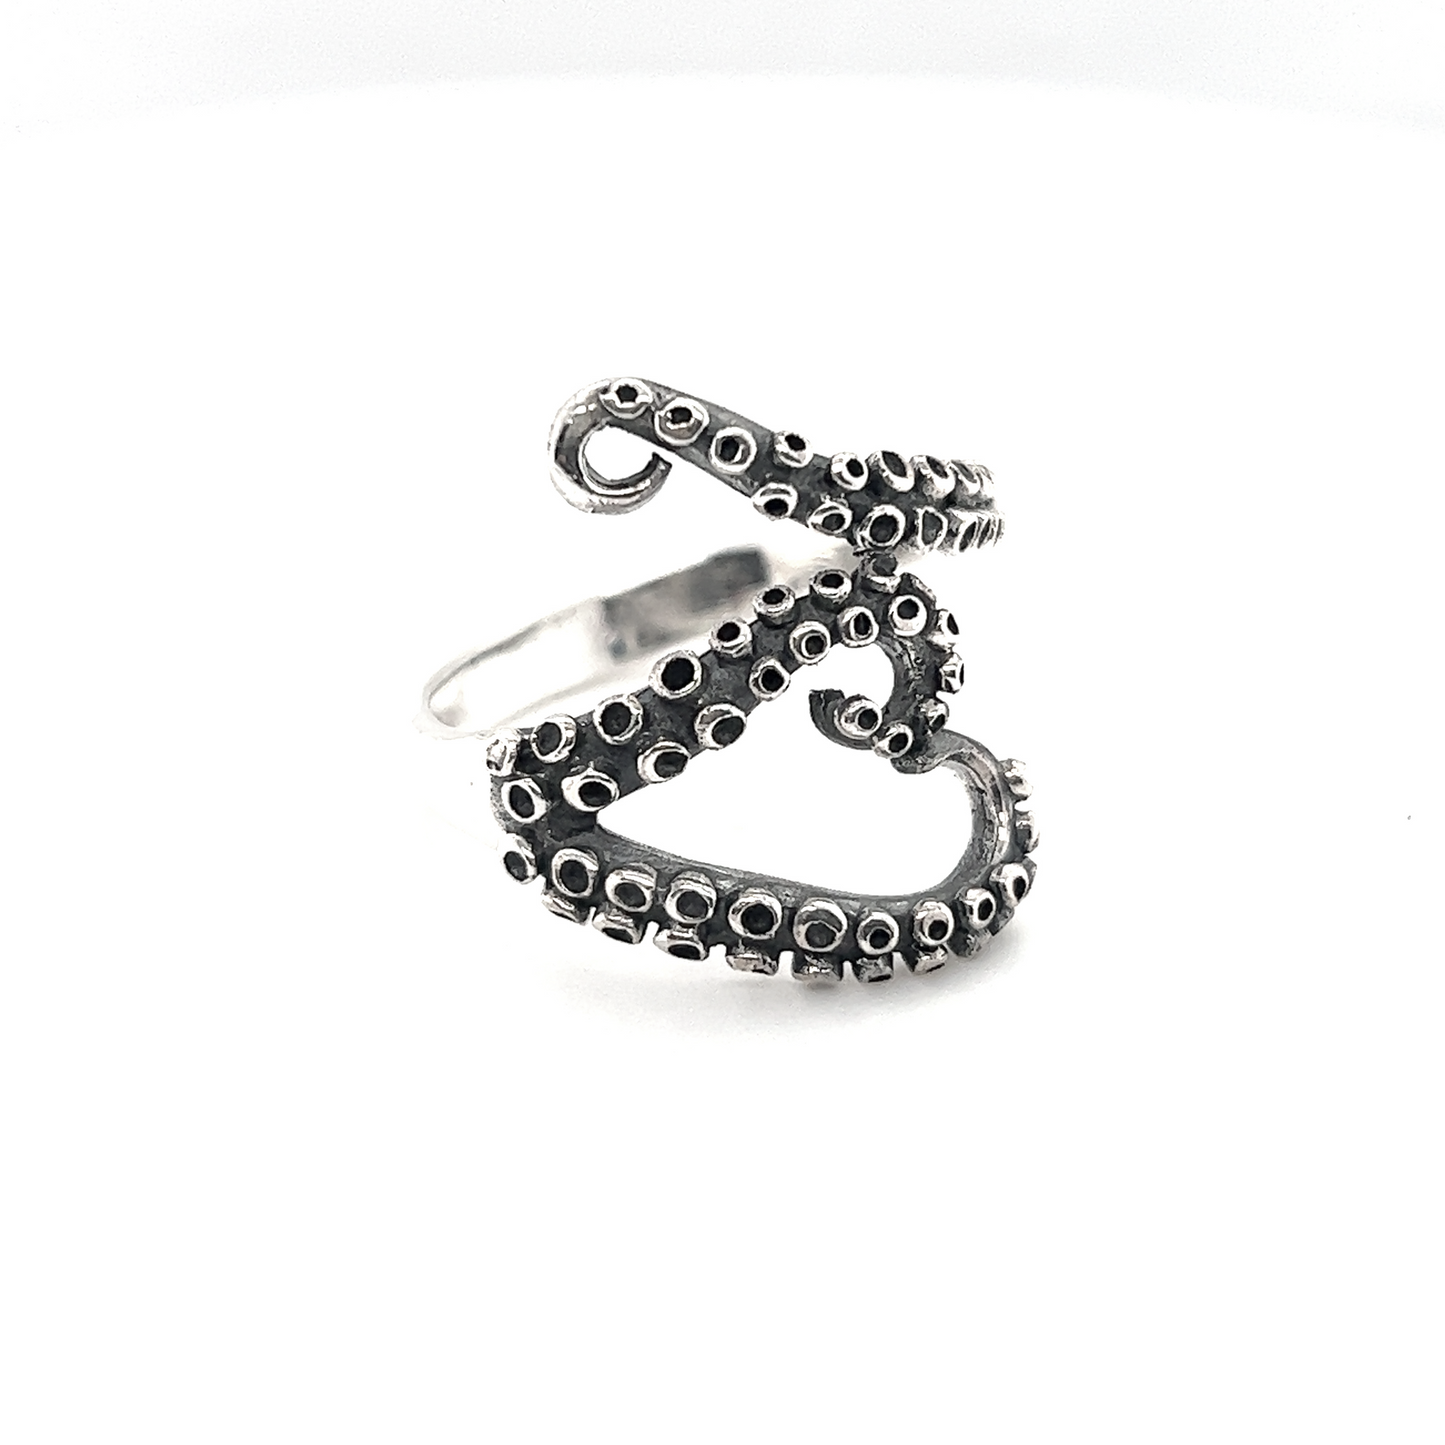 An Intricate Octopus Tentacle Ring made of .925 Sterling Silver, showcased on a clean white background.